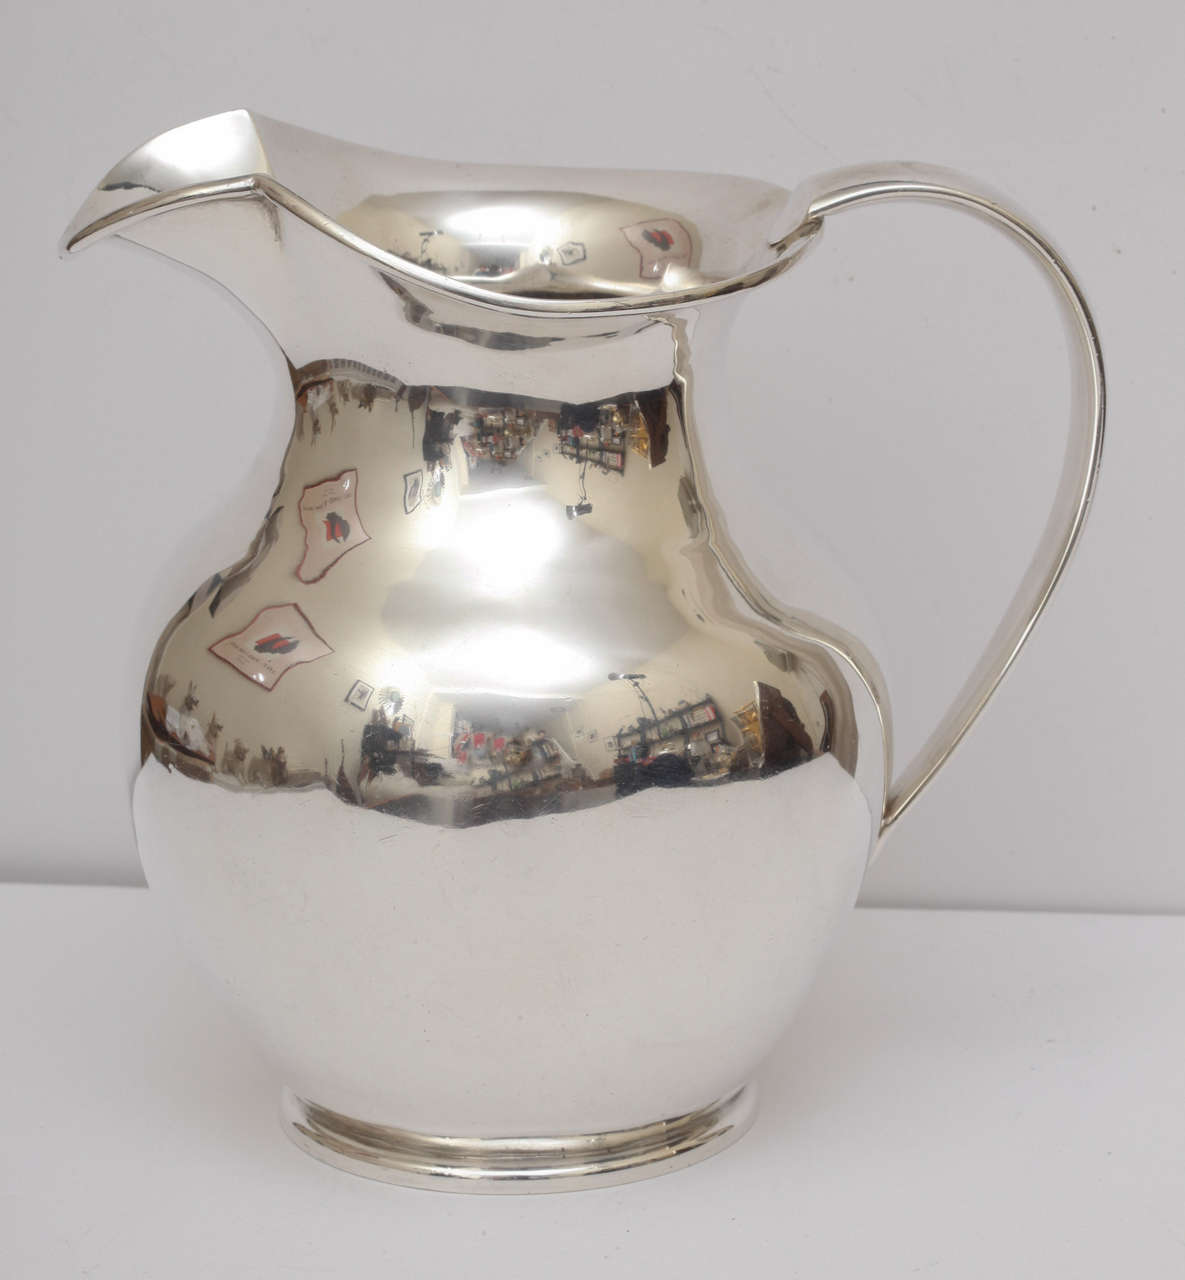 A sterling silver water pitcher by silversmith Edmond Johnson of Dublin, Ireland, one of Dublin's foremost silversmiths. This is a hand wrought piece with a very heavy weight and a nice thick gauge. Made at at the turn of the century, this piece has